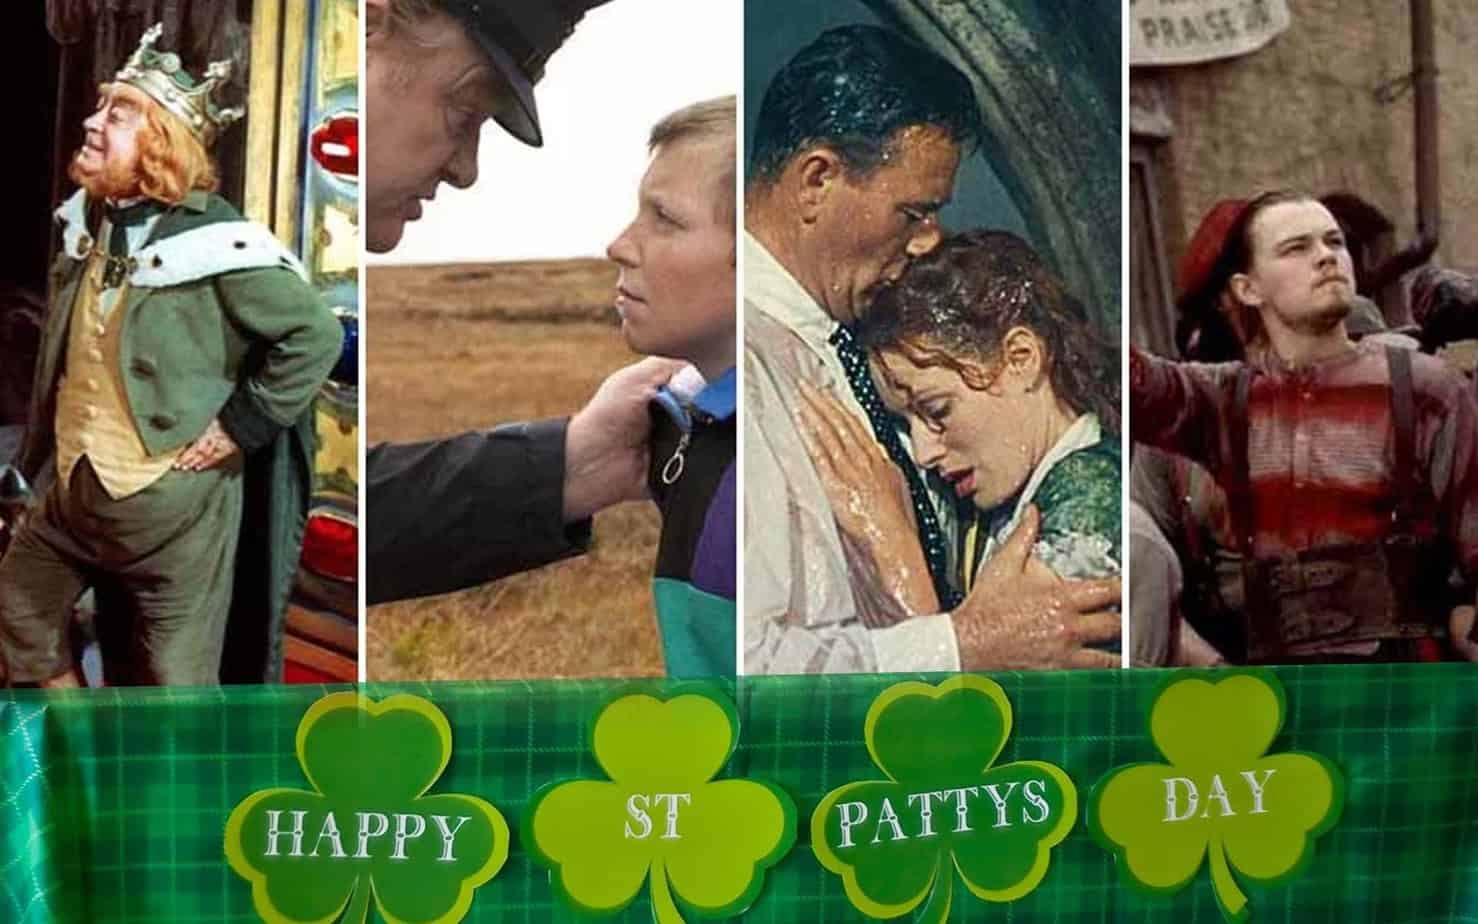 10 BEST MOVIES TO CELEBRATE ST PATTYS DAY - Get your Irish up with these picks